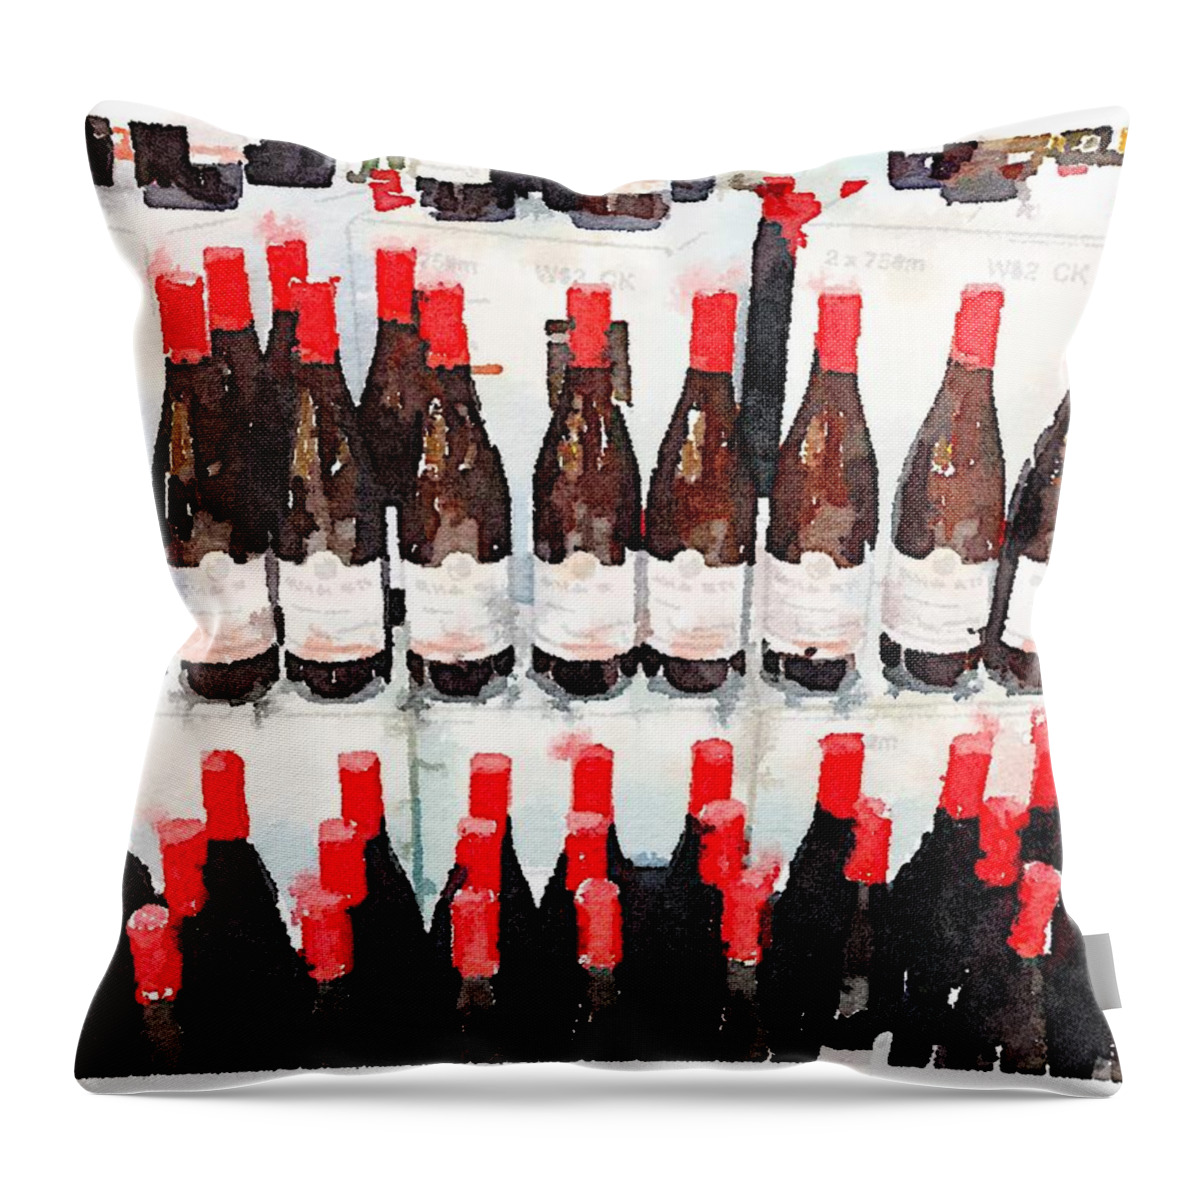 Waterlogue Throw Pillow featuring the digital art Vino #1 by Shannon Grissom